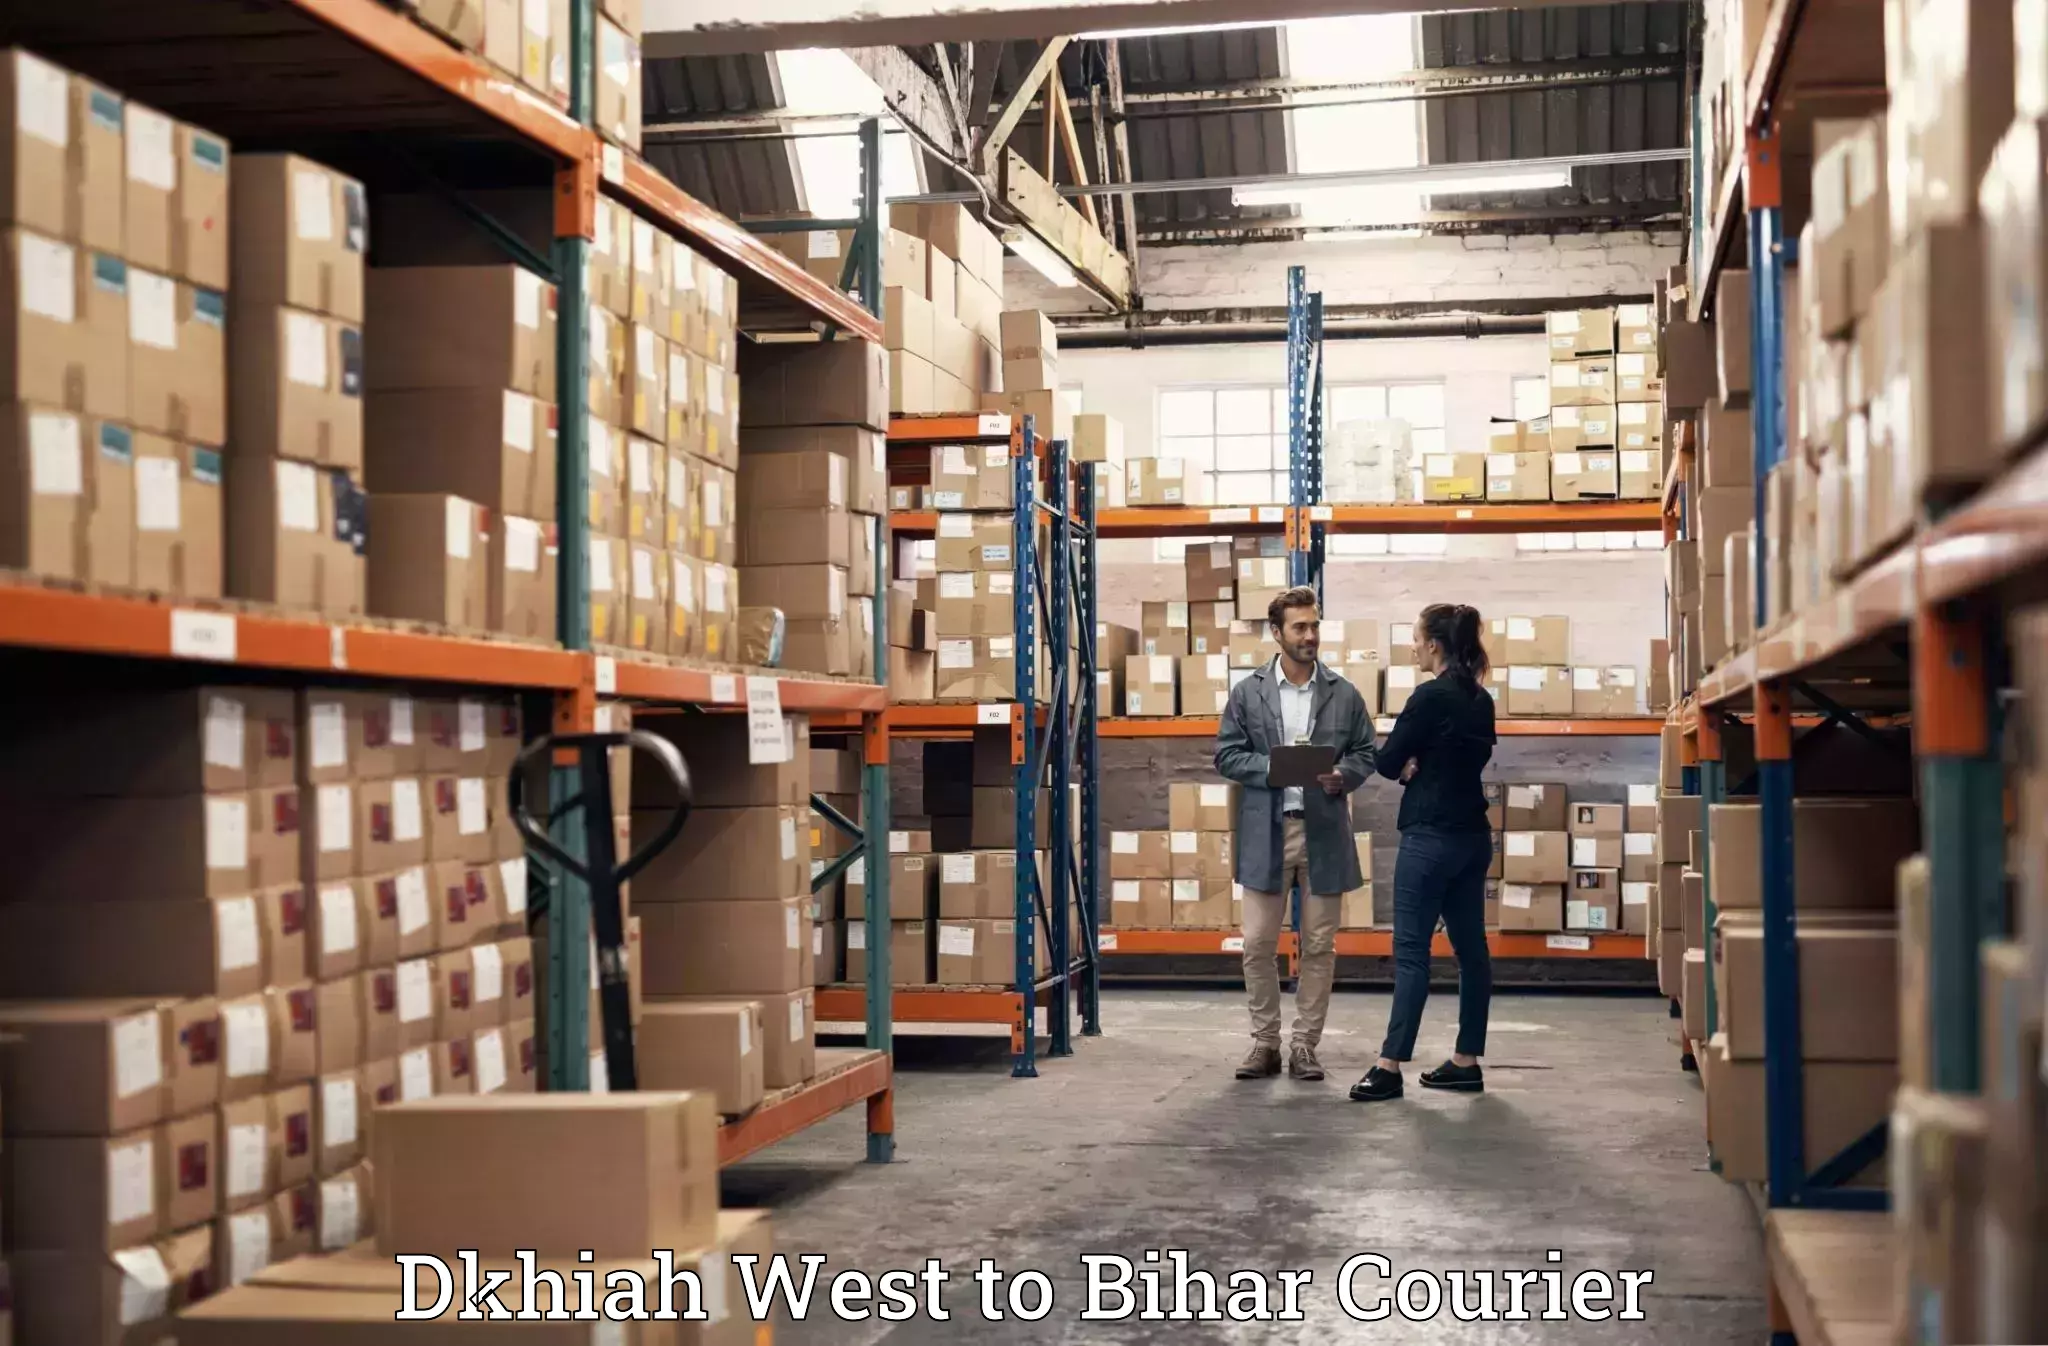 Baggage courier advice Dkhiah West to Kamtaul